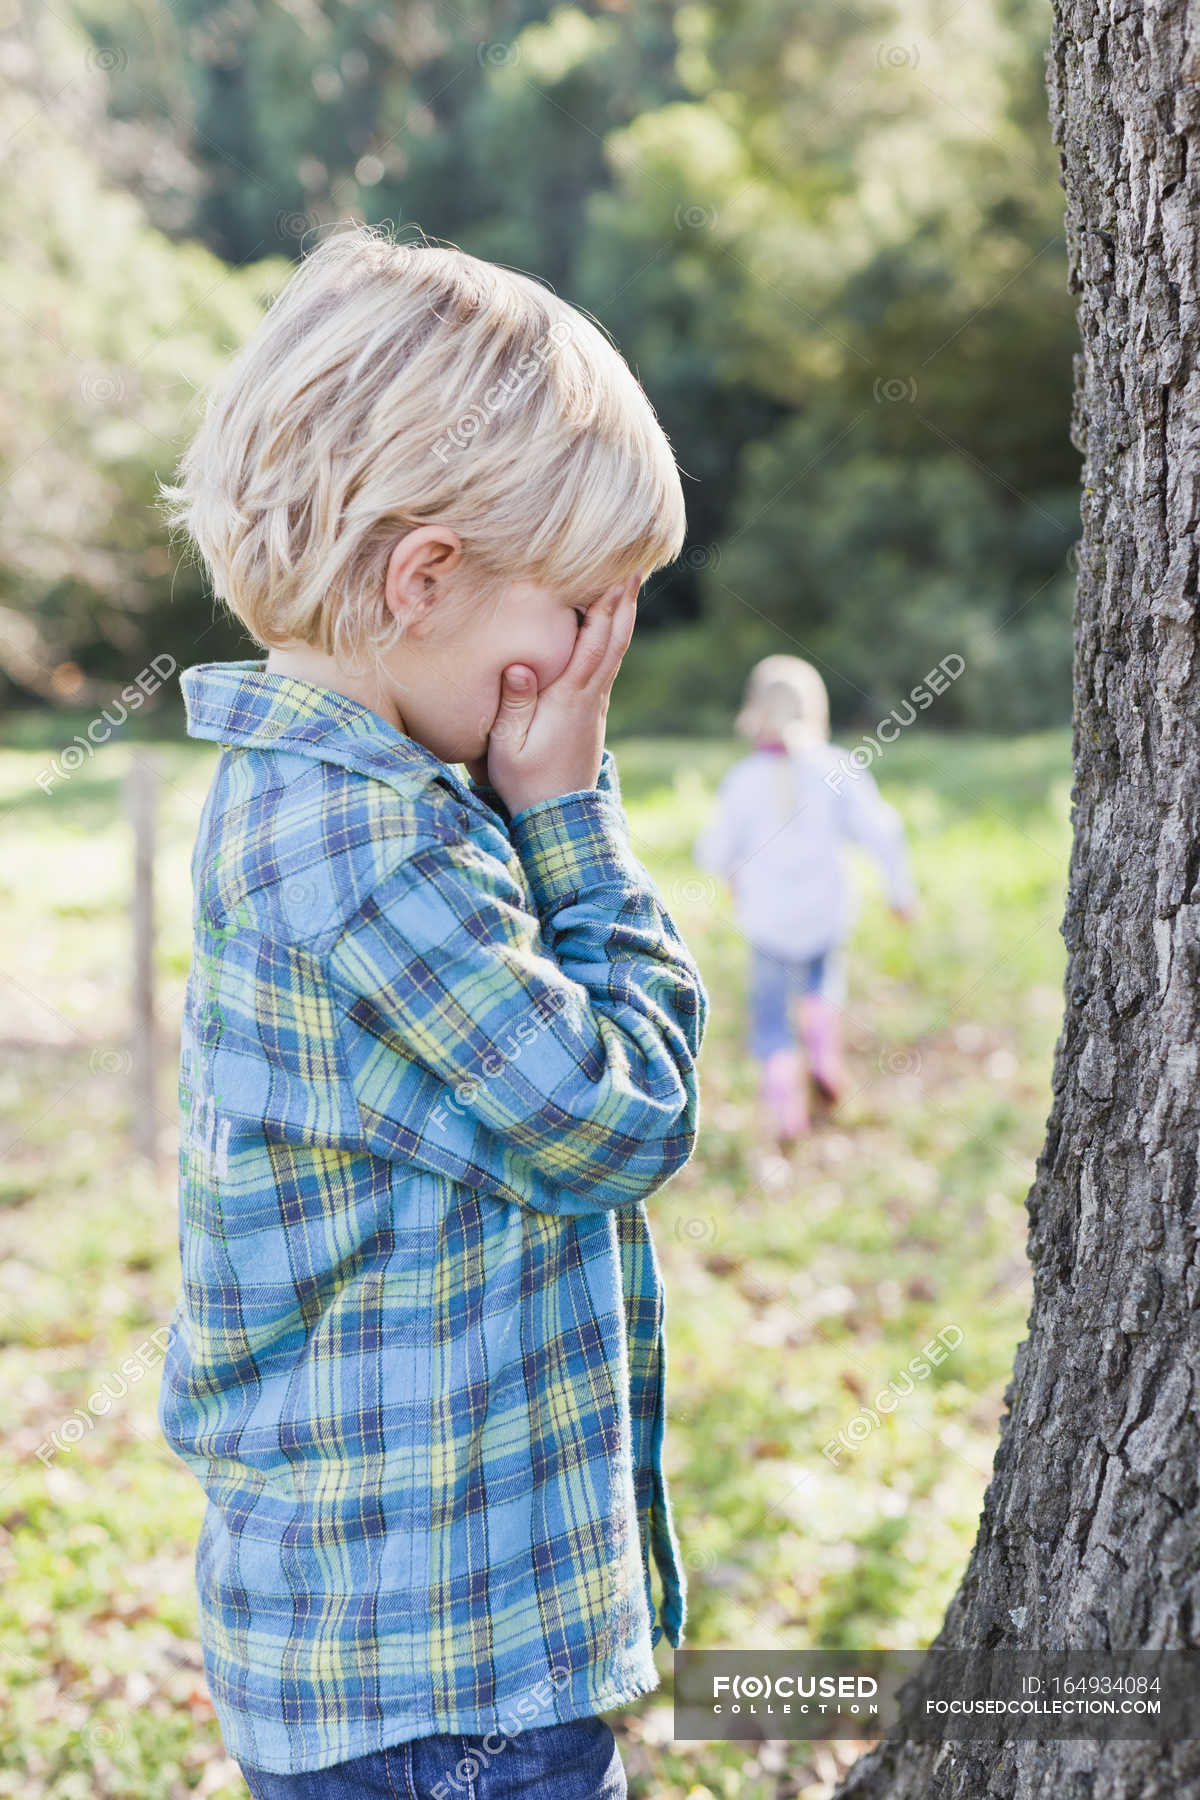 children playing hide and seek